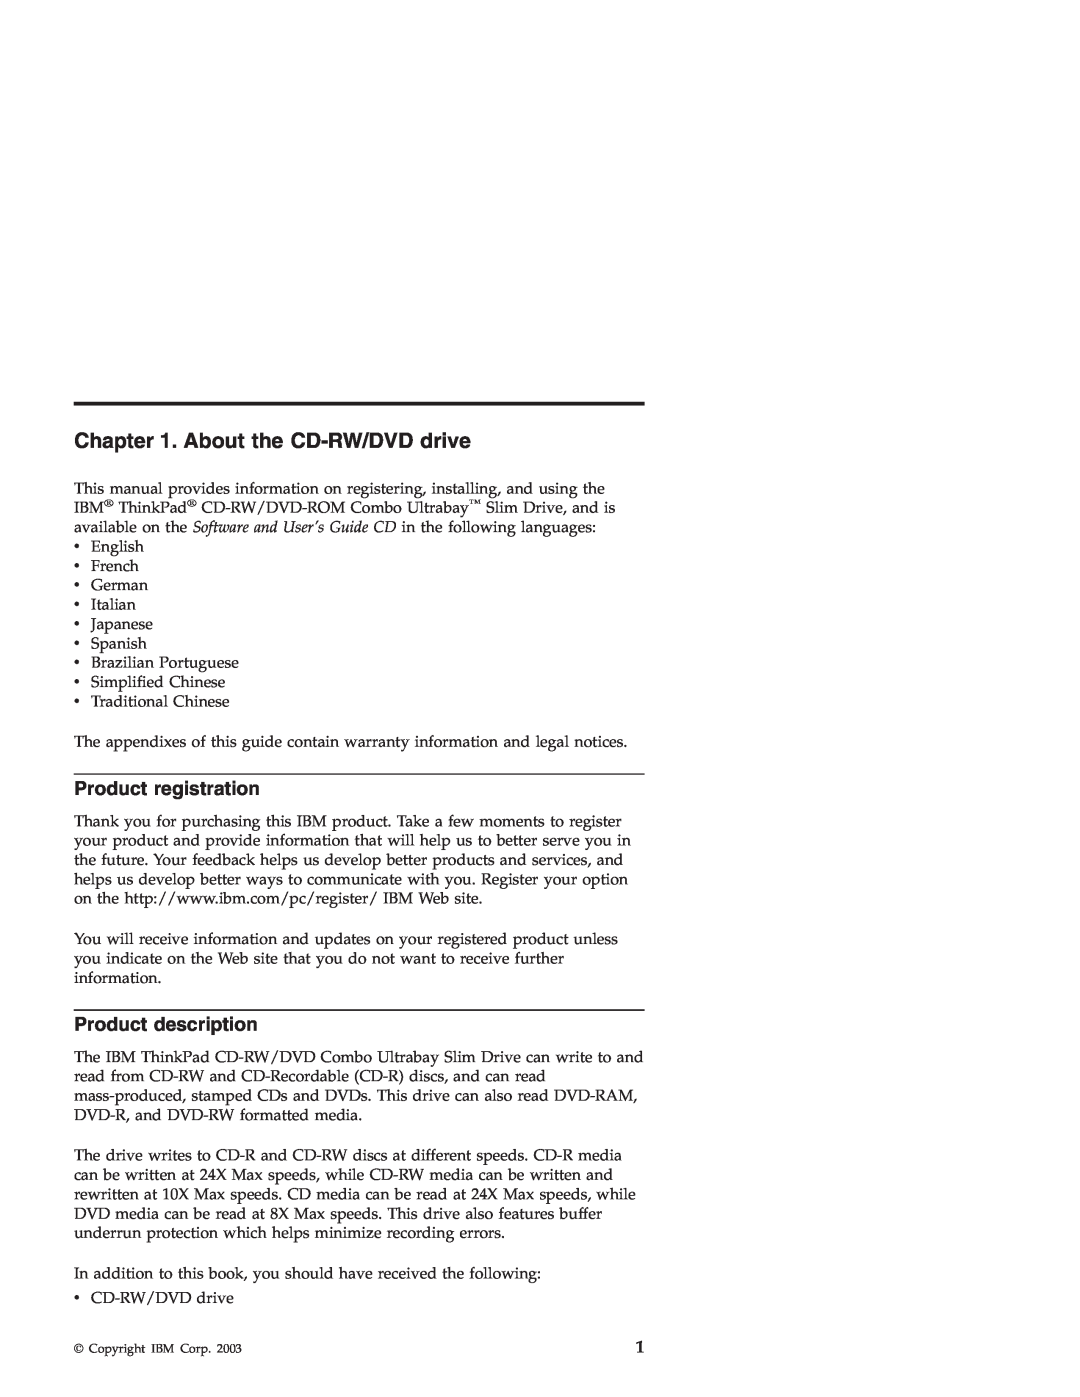 IBM 22P7007 manual About the CD-RW/DVD drive, Product registration, Product description 